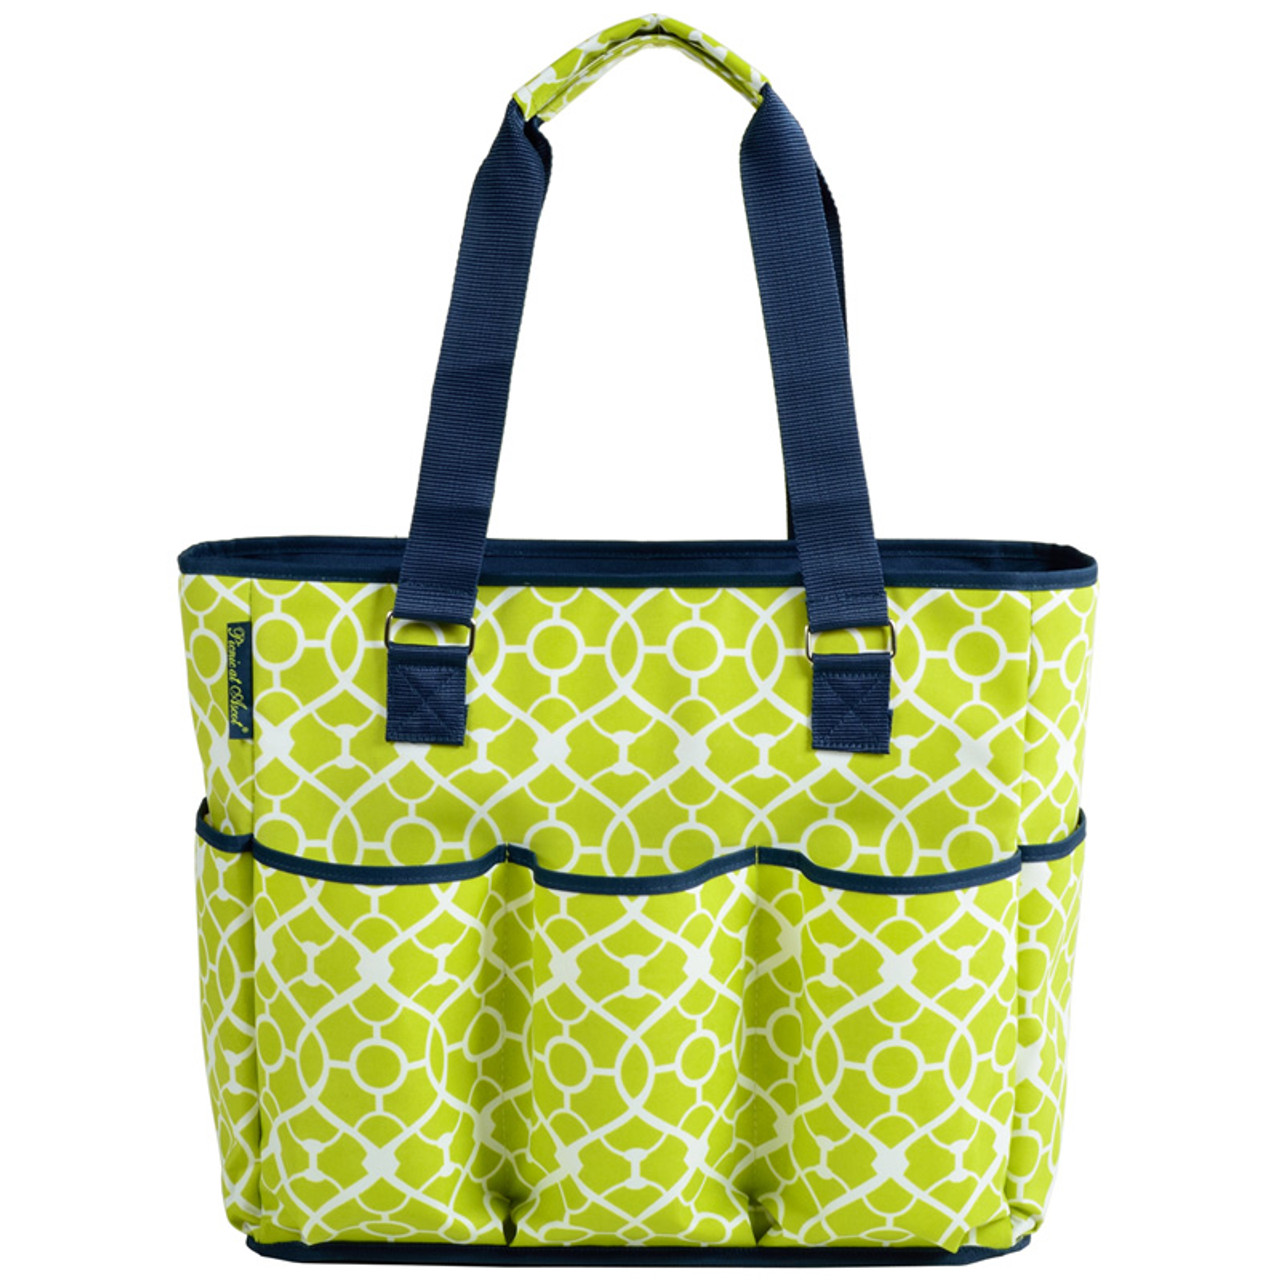  Picnic at Ascot Extra Large Insulated Cooler Bag - 30